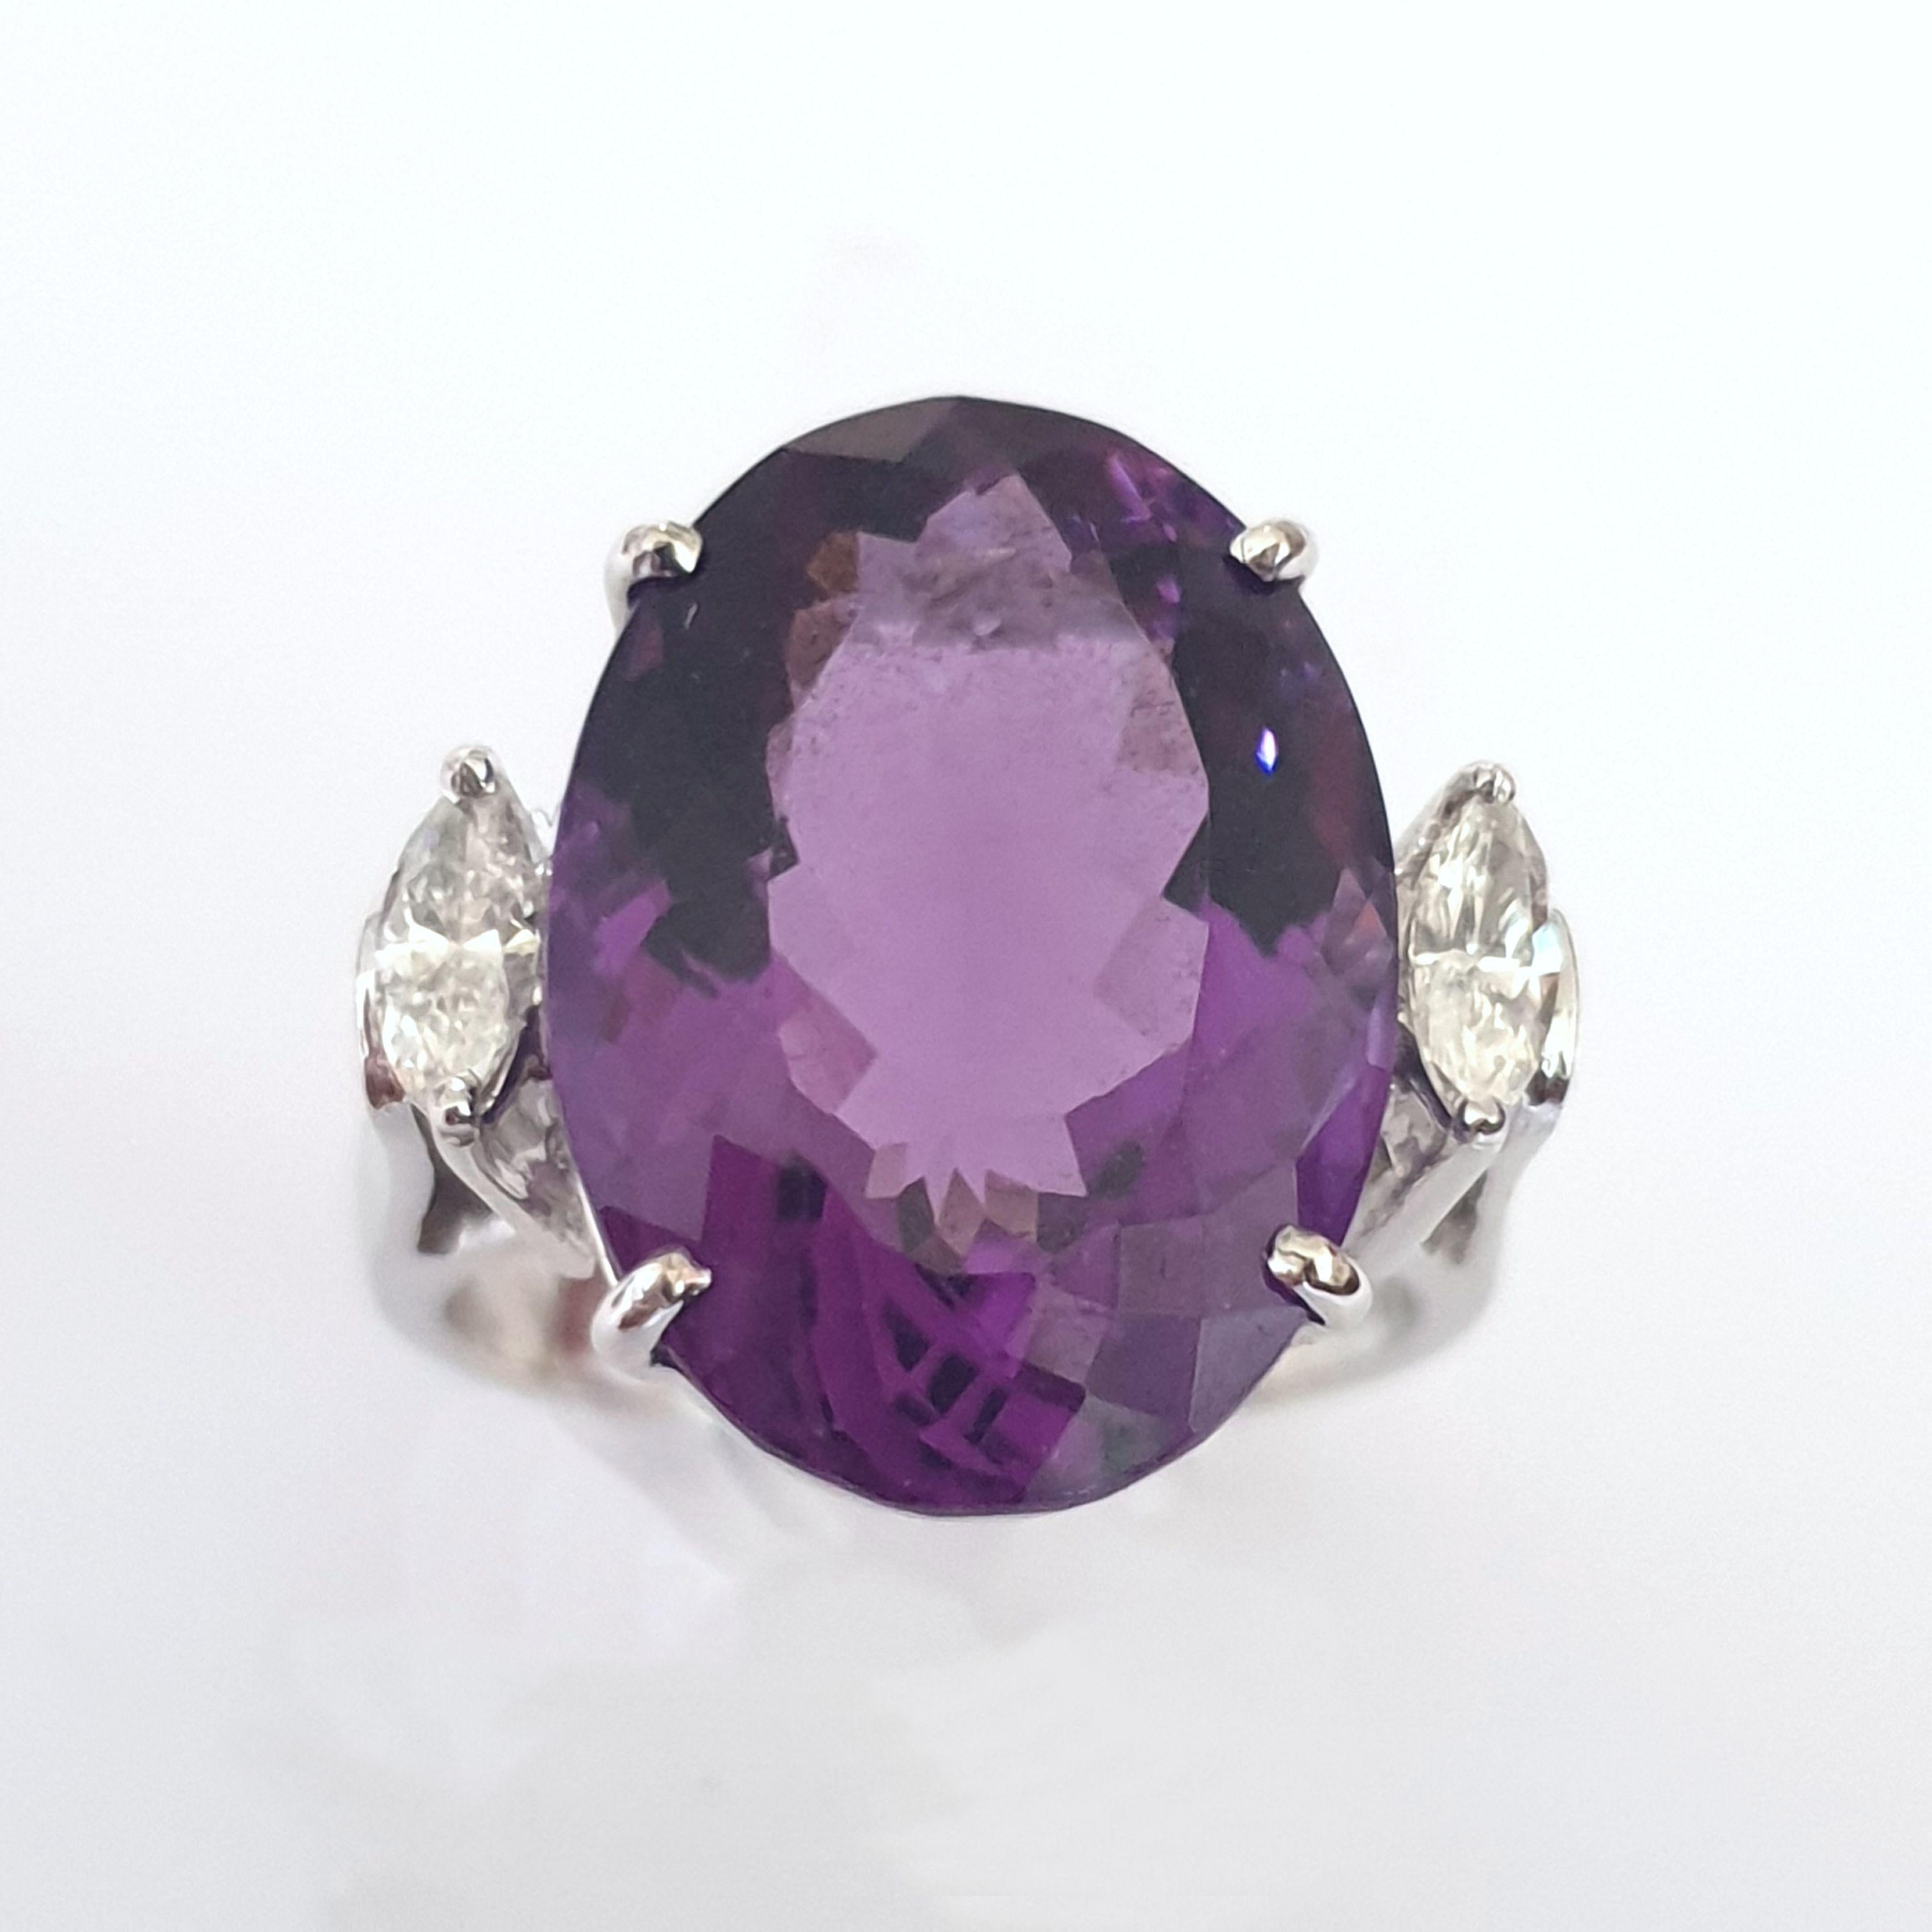 Germany, 1960's . Set with oval shaped amethyst of approximately 9,2 carats. Flanked by two navette-cut diamonds weighing total circa 0,40 ct. Mounted in 14 K white gold. Hallmarked with the purity 585, PNG and tree in triangle. 
Weight: 8,99 grams